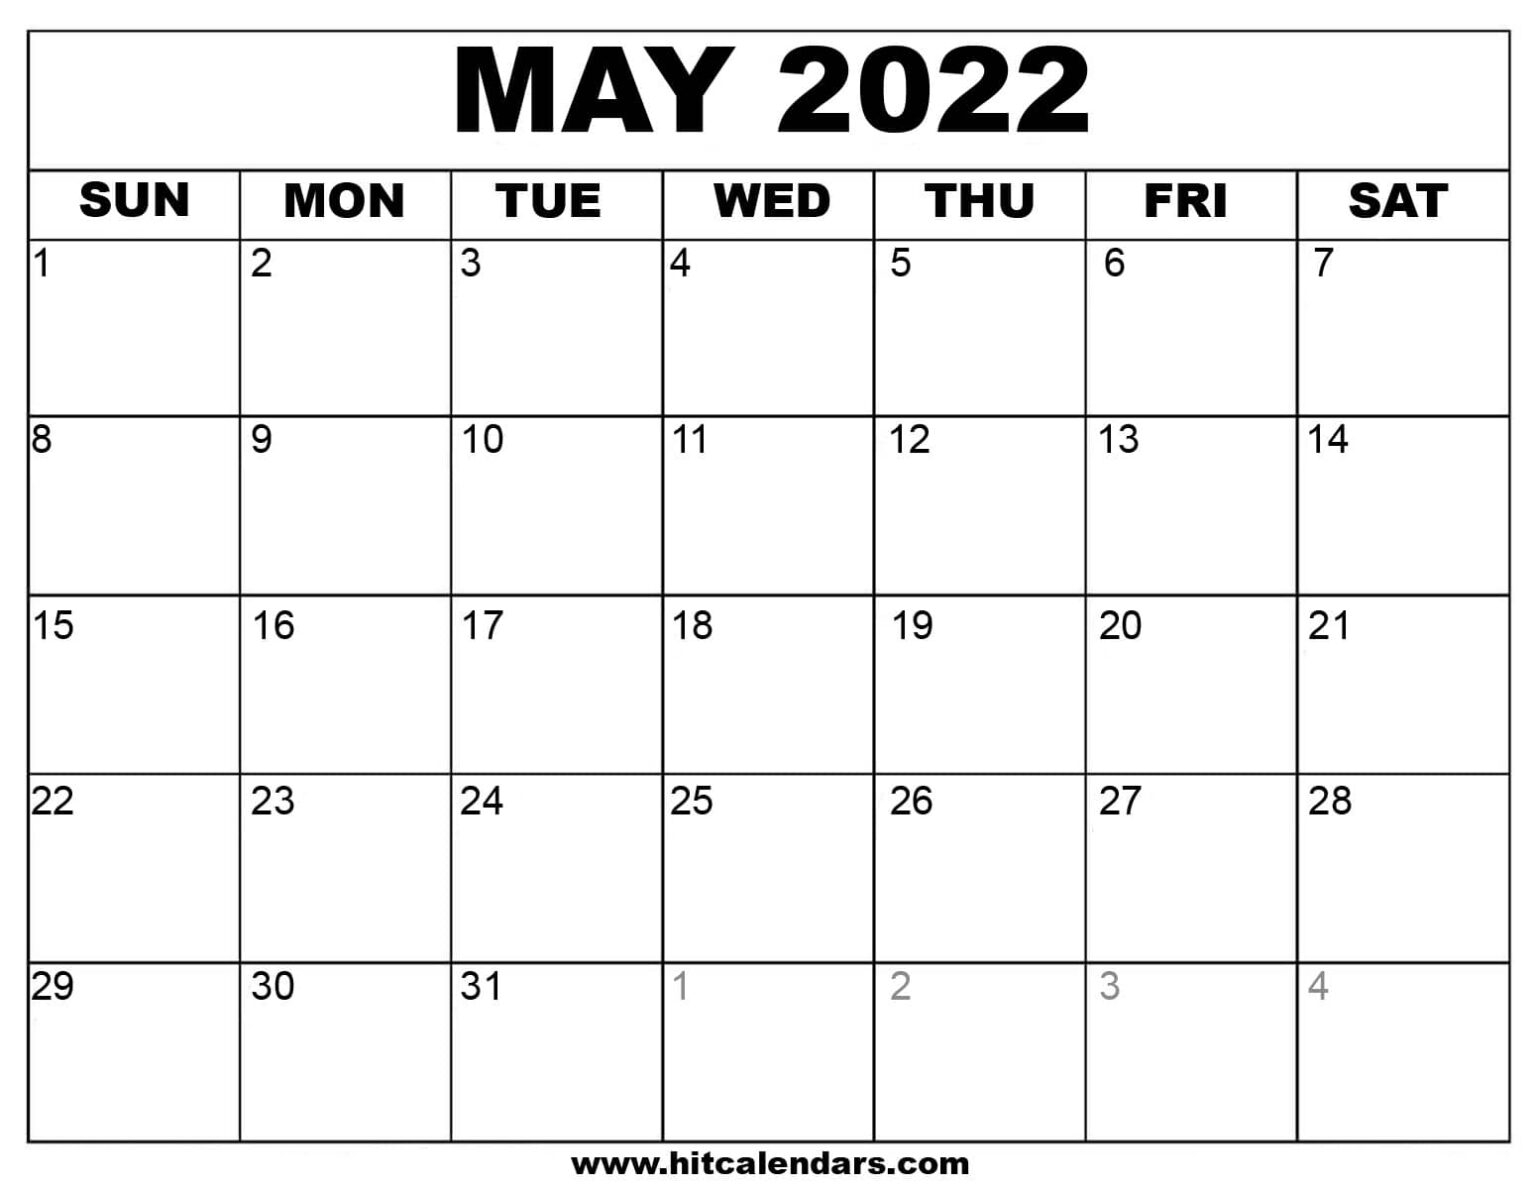 Catch Show Calendar For May 2022